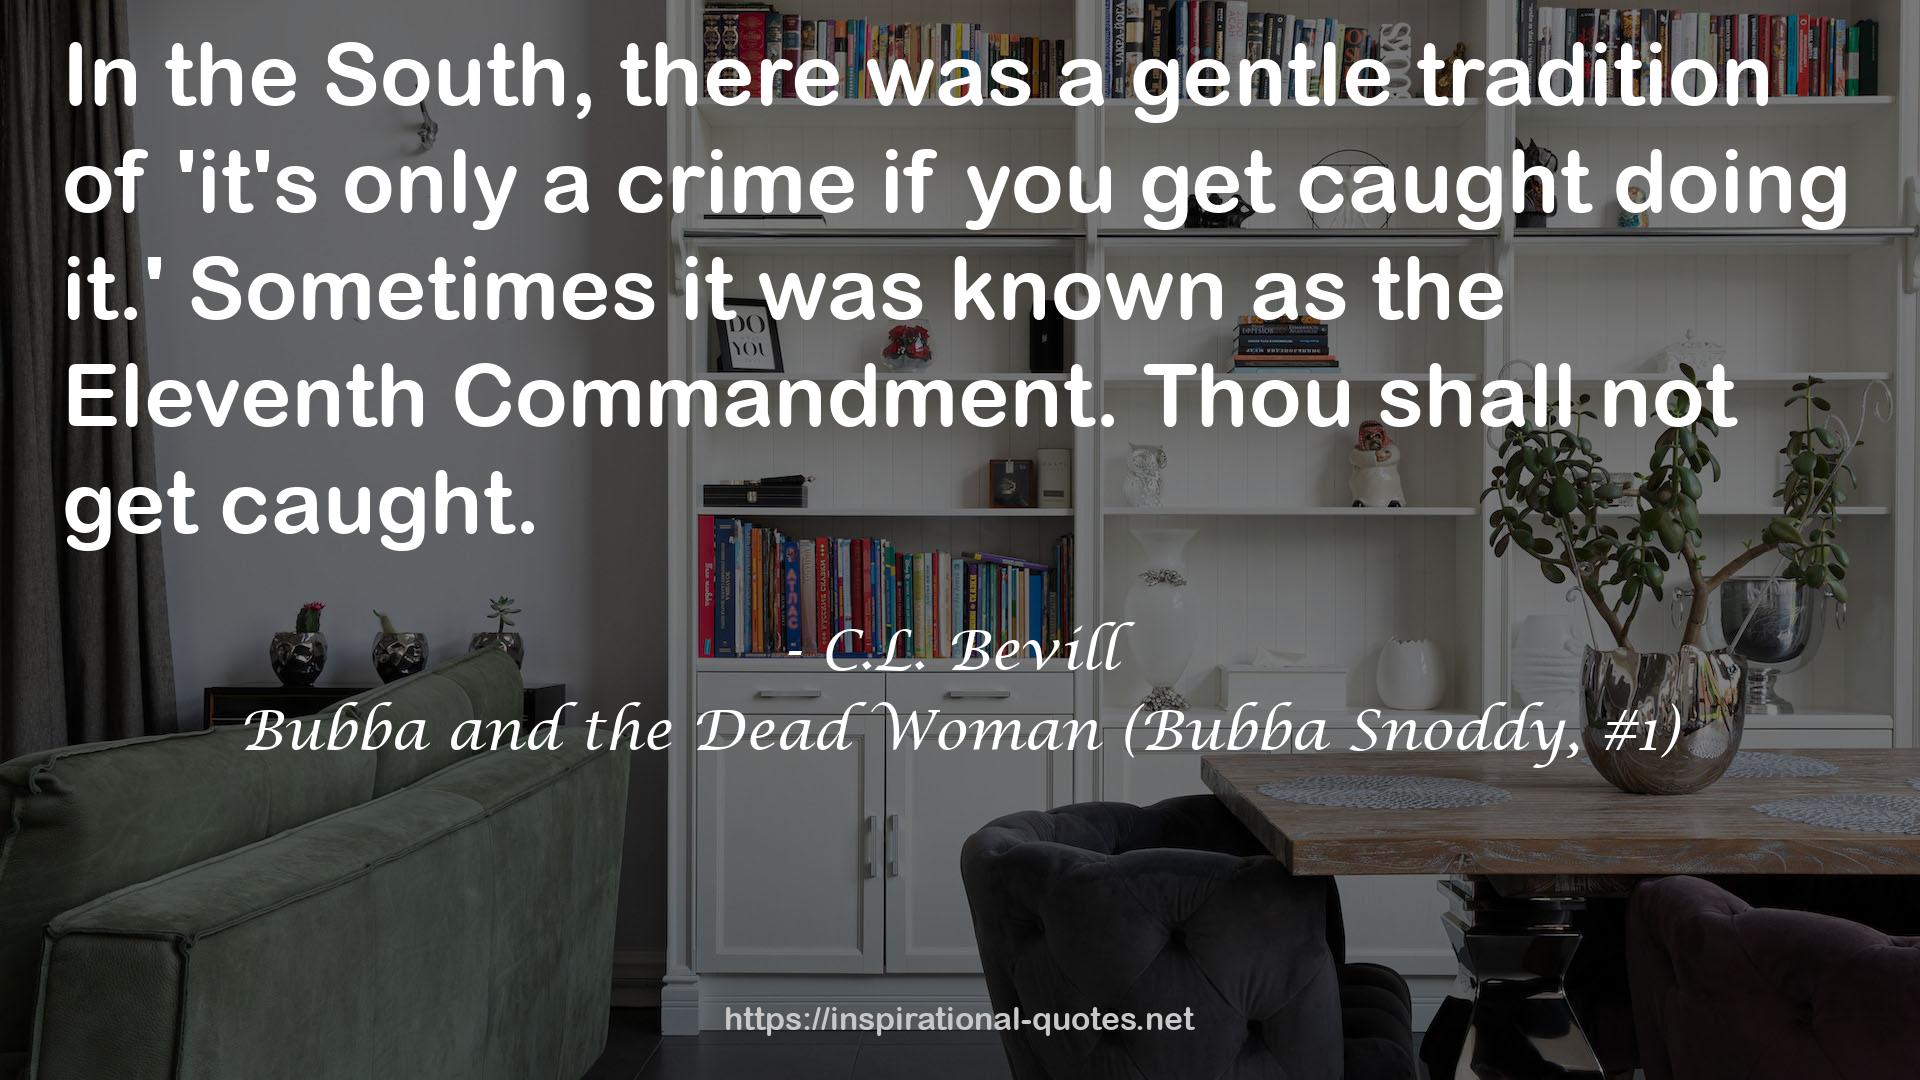 Bubba and the Dead Woman (Bubba Snoddy, #1) QUOTES